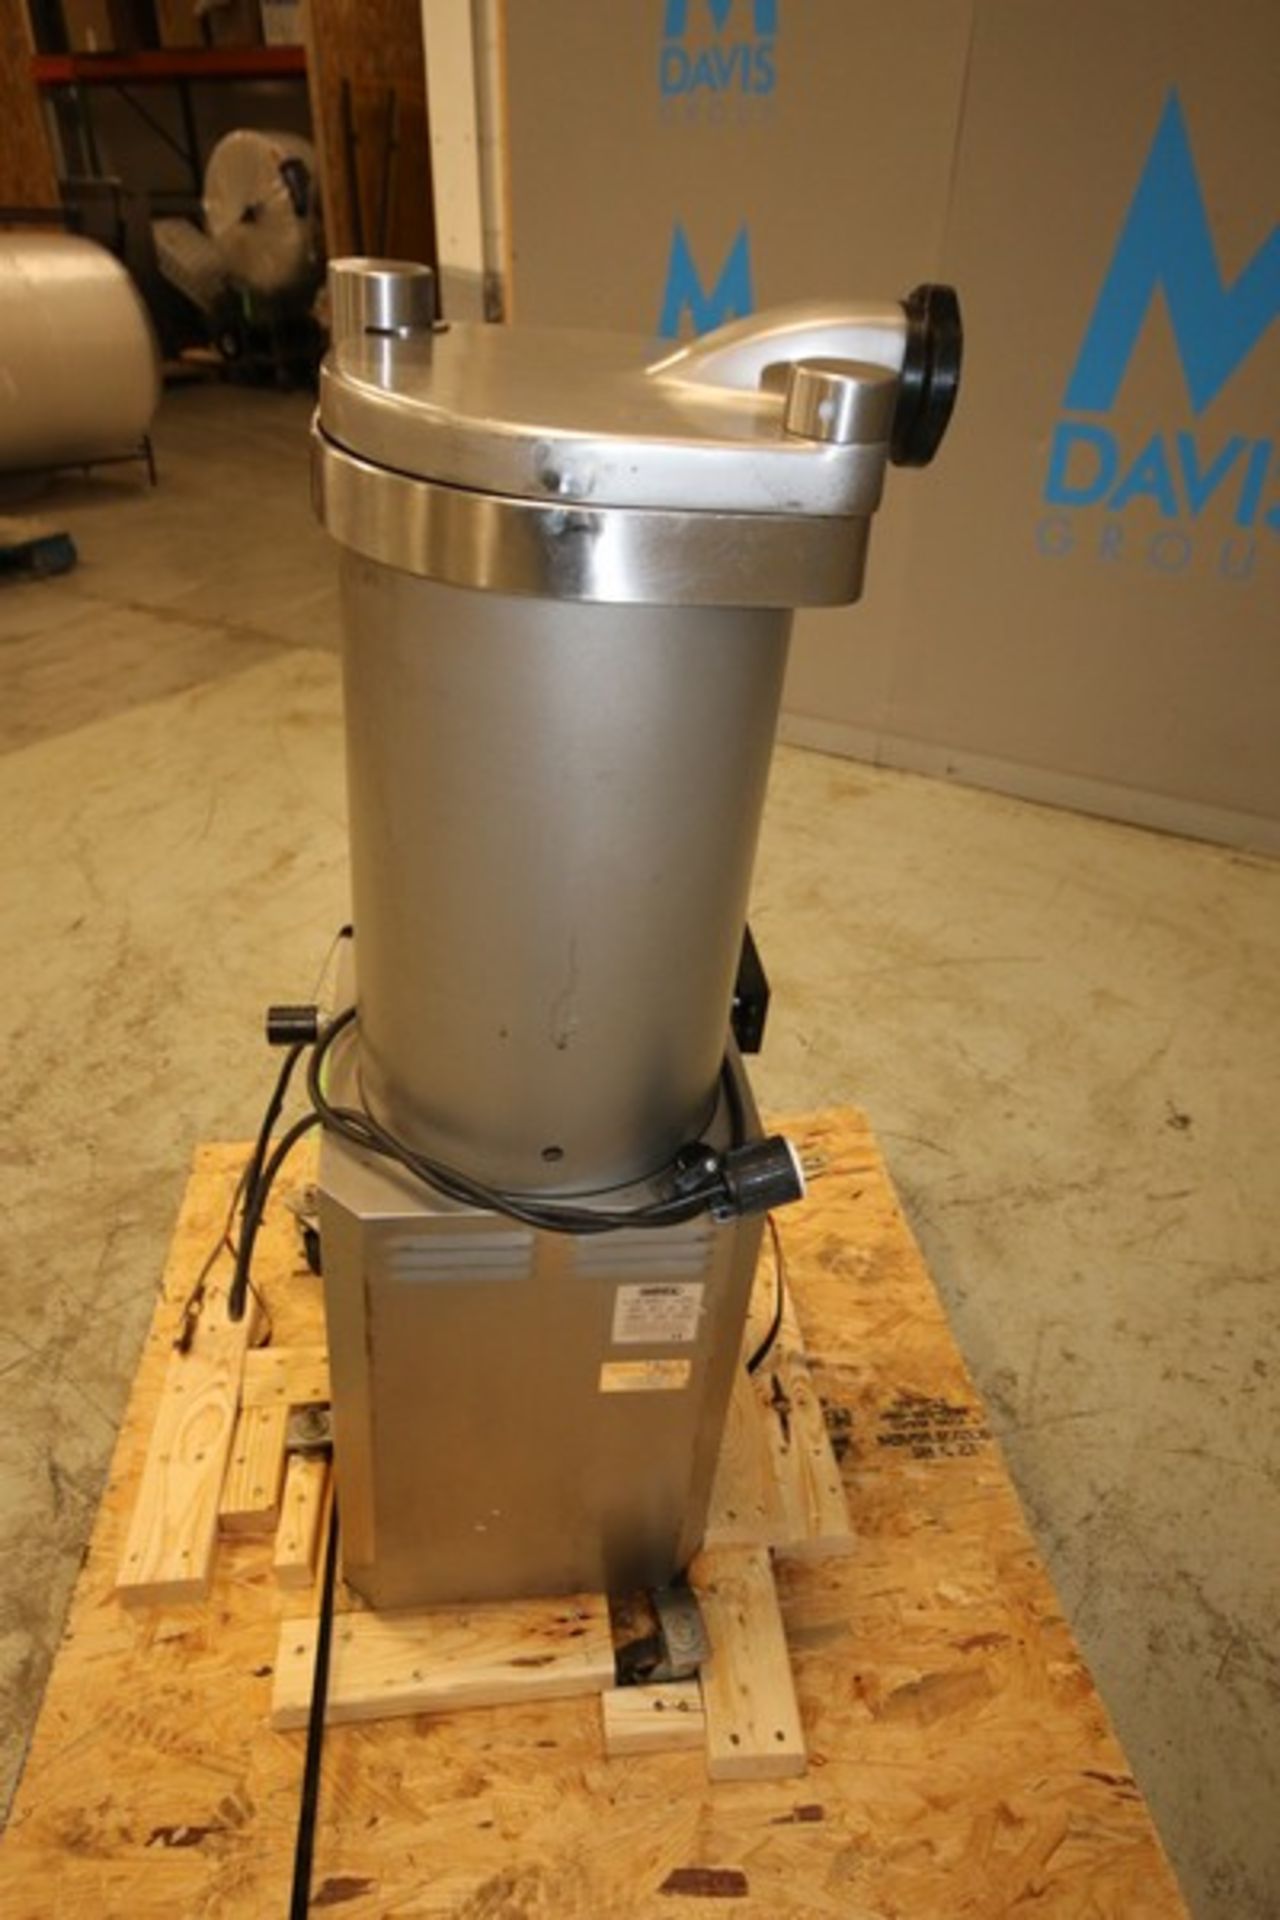 Mainca S/S Sausage Stuffer, Model EI-30 INT, SN 6780N, 220V (INV#103004) (Located @ the MDG - Image 5 of 7